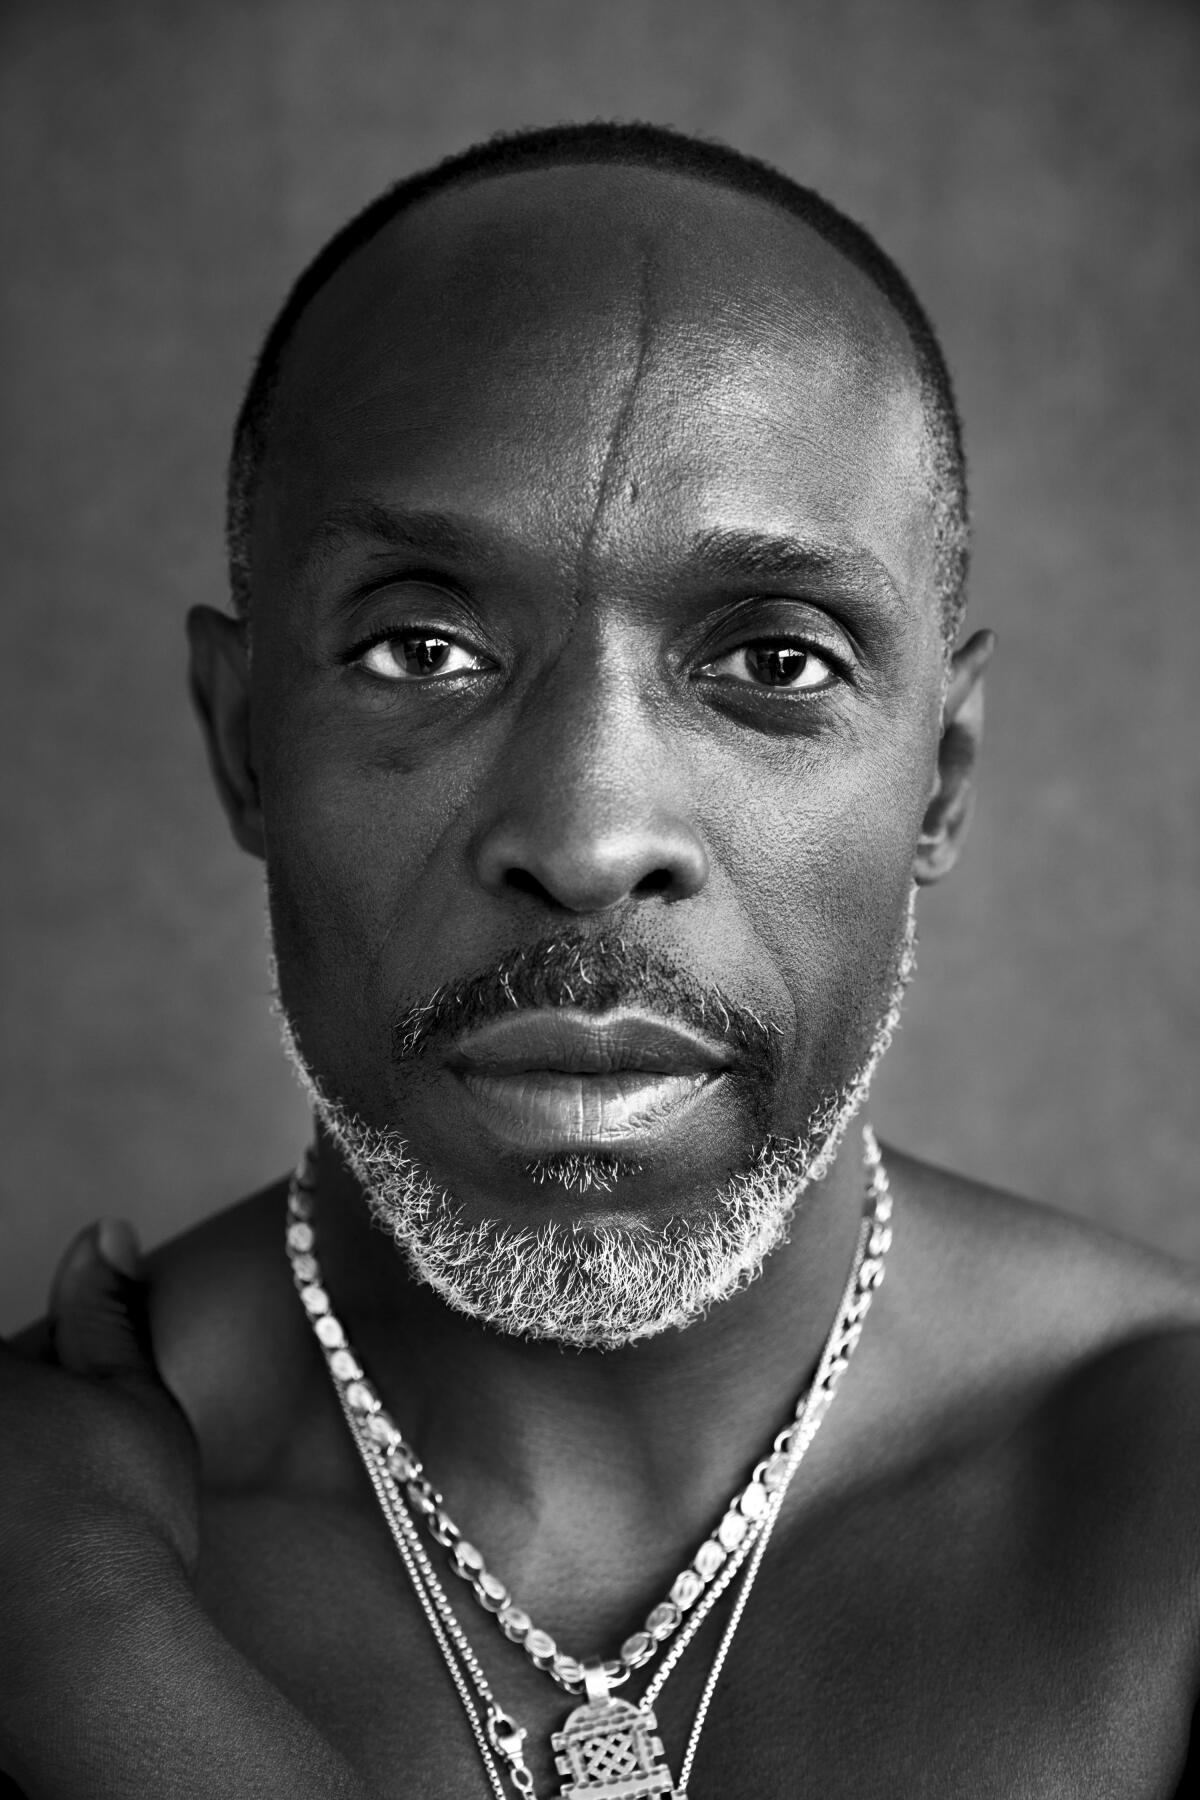 Michael K. Williams, sporting necklaces, stares at the camera